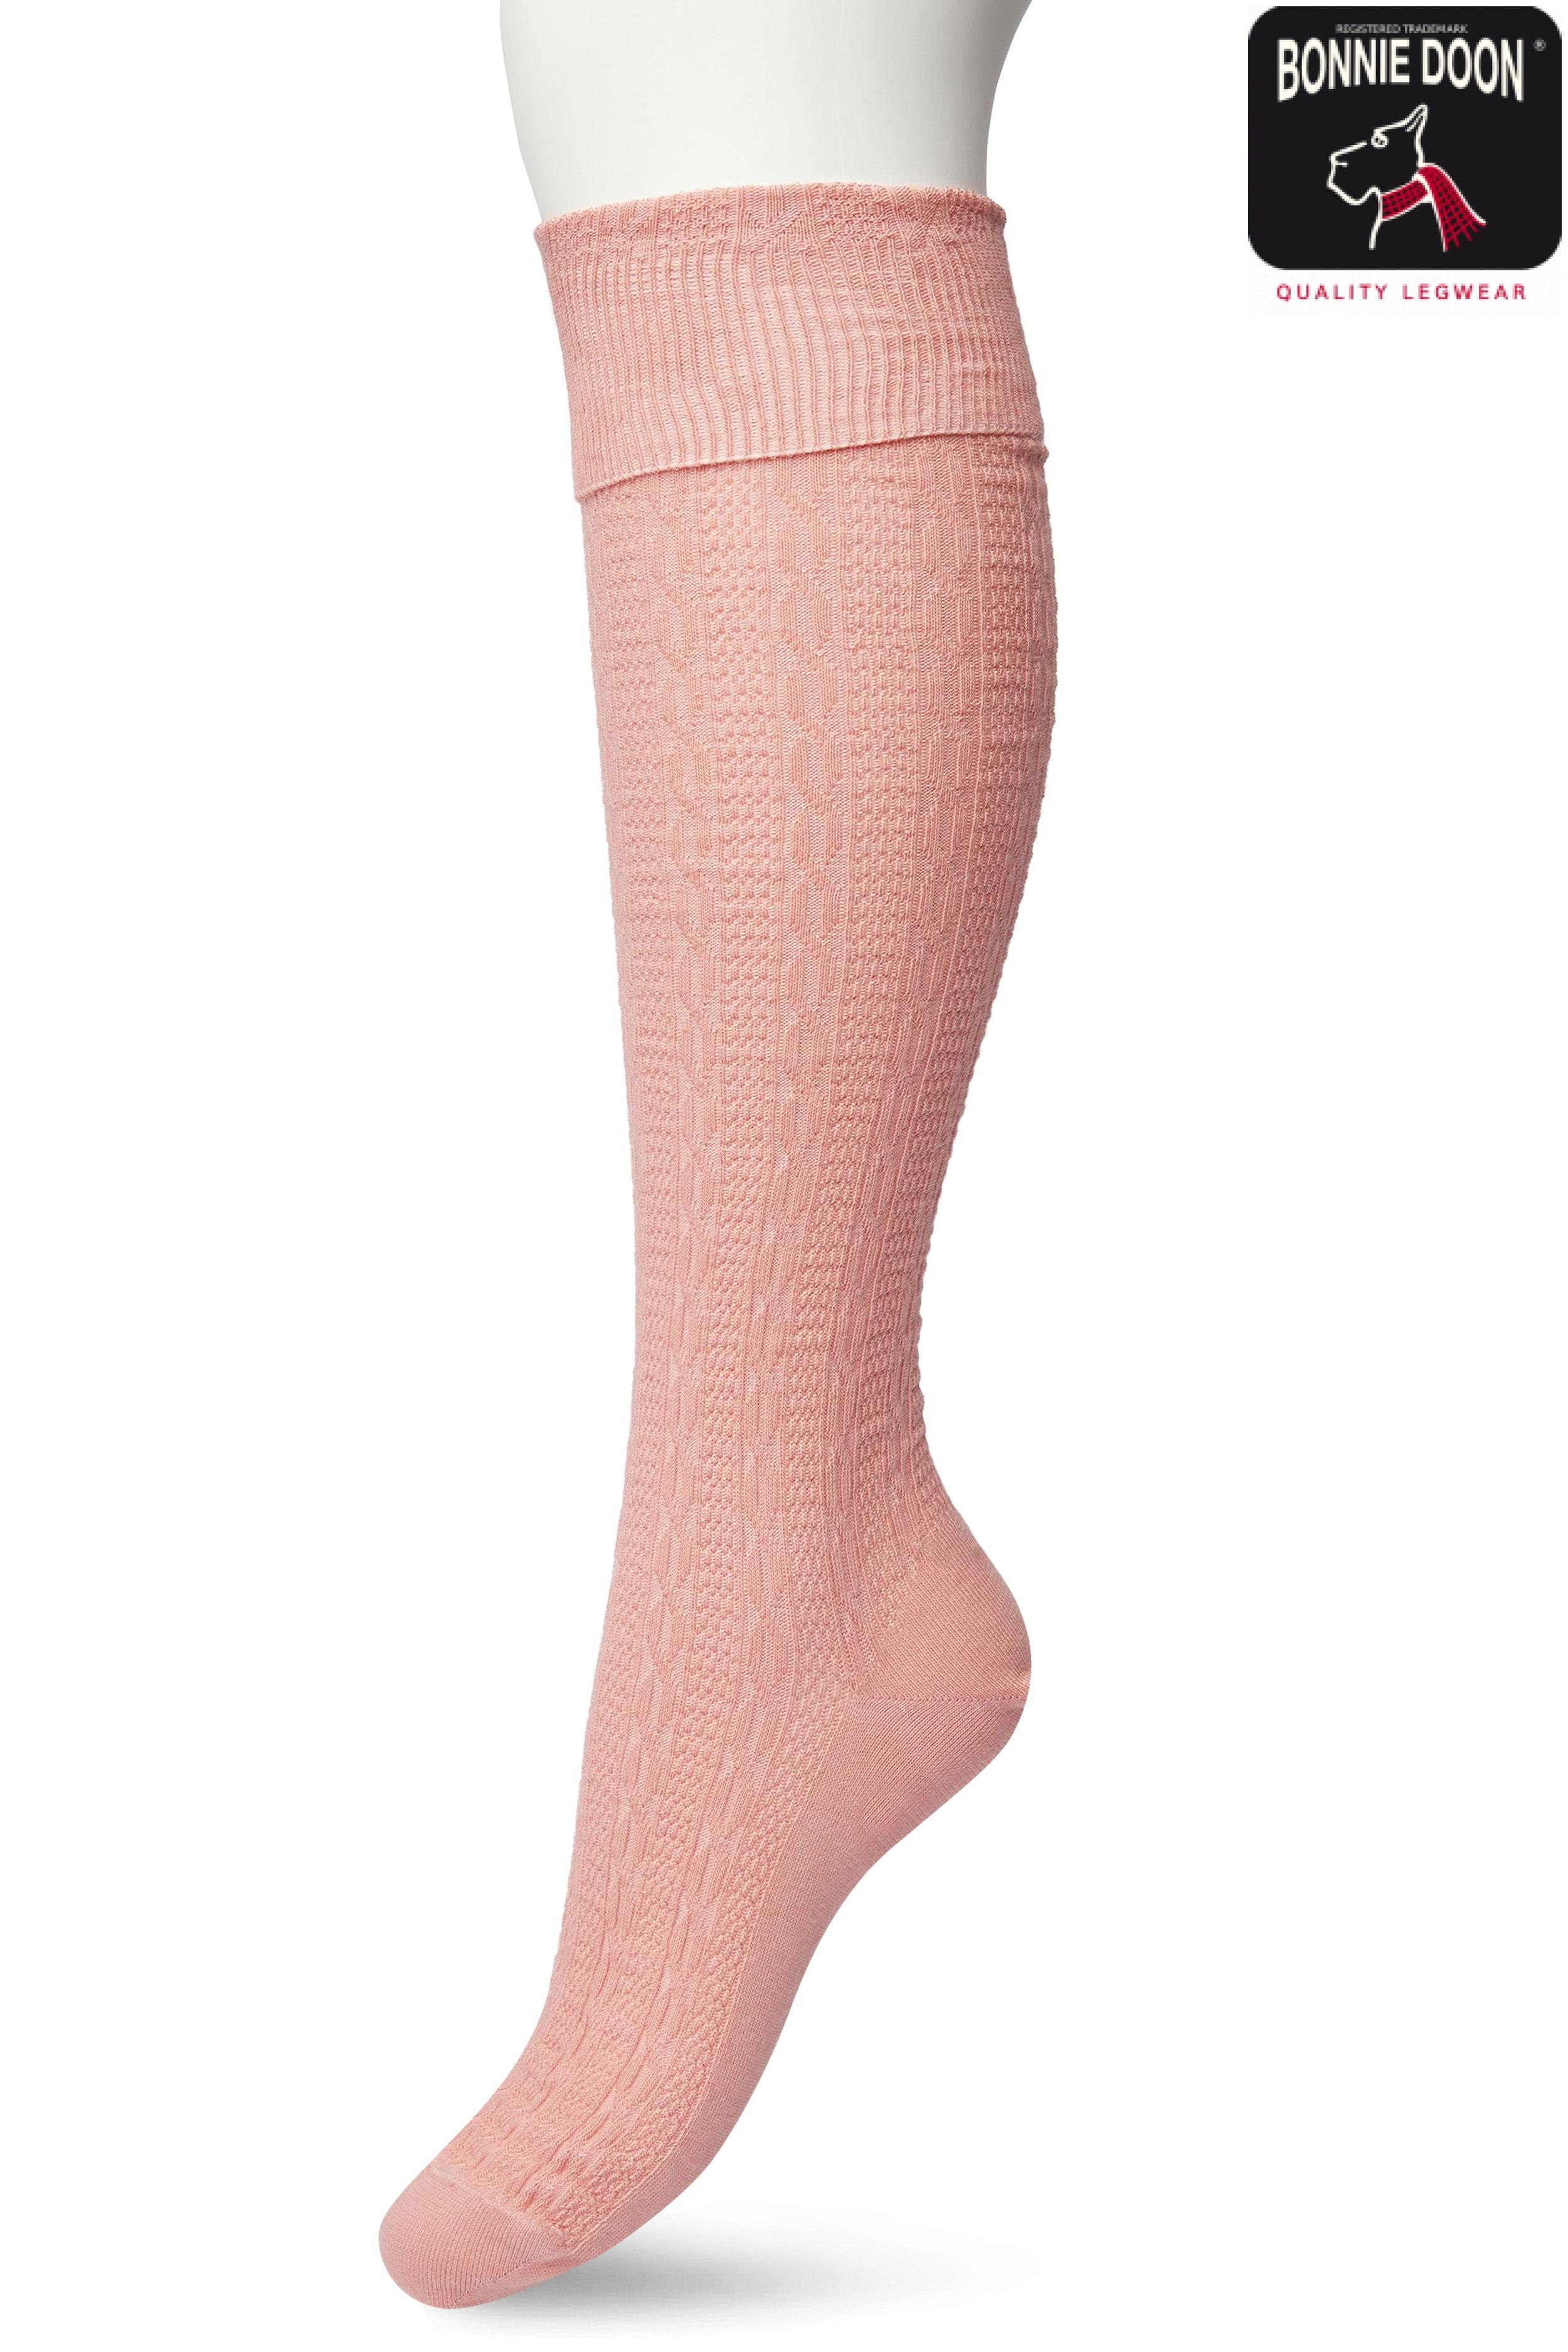 Classic Cable knee high Allmost apricot